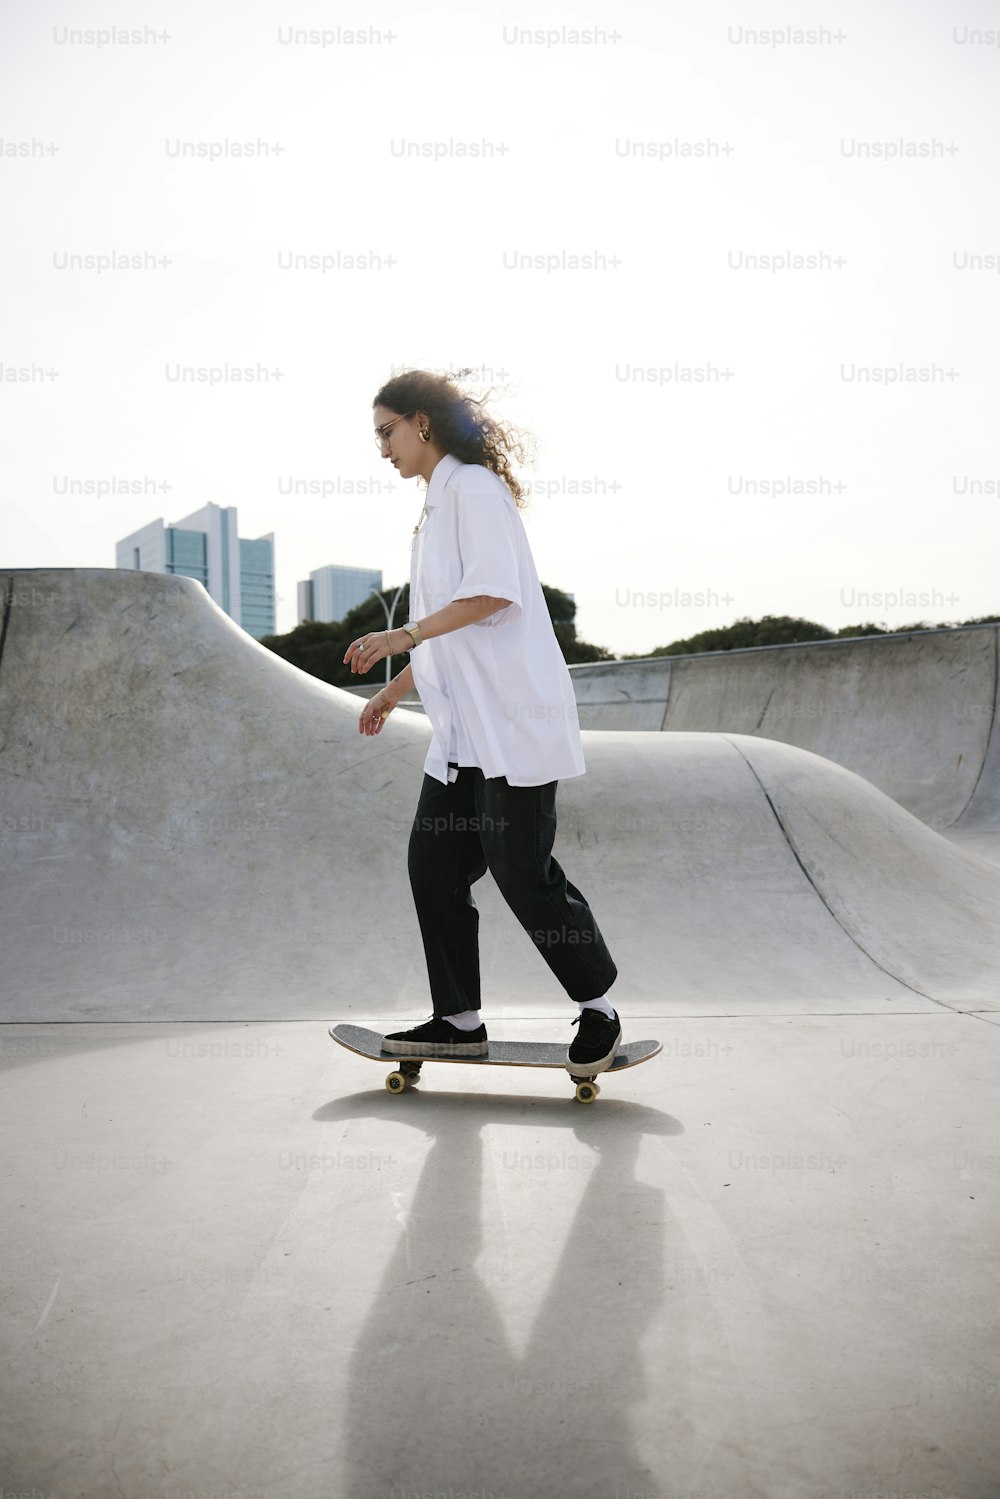 a person riding a skate board on a ramp